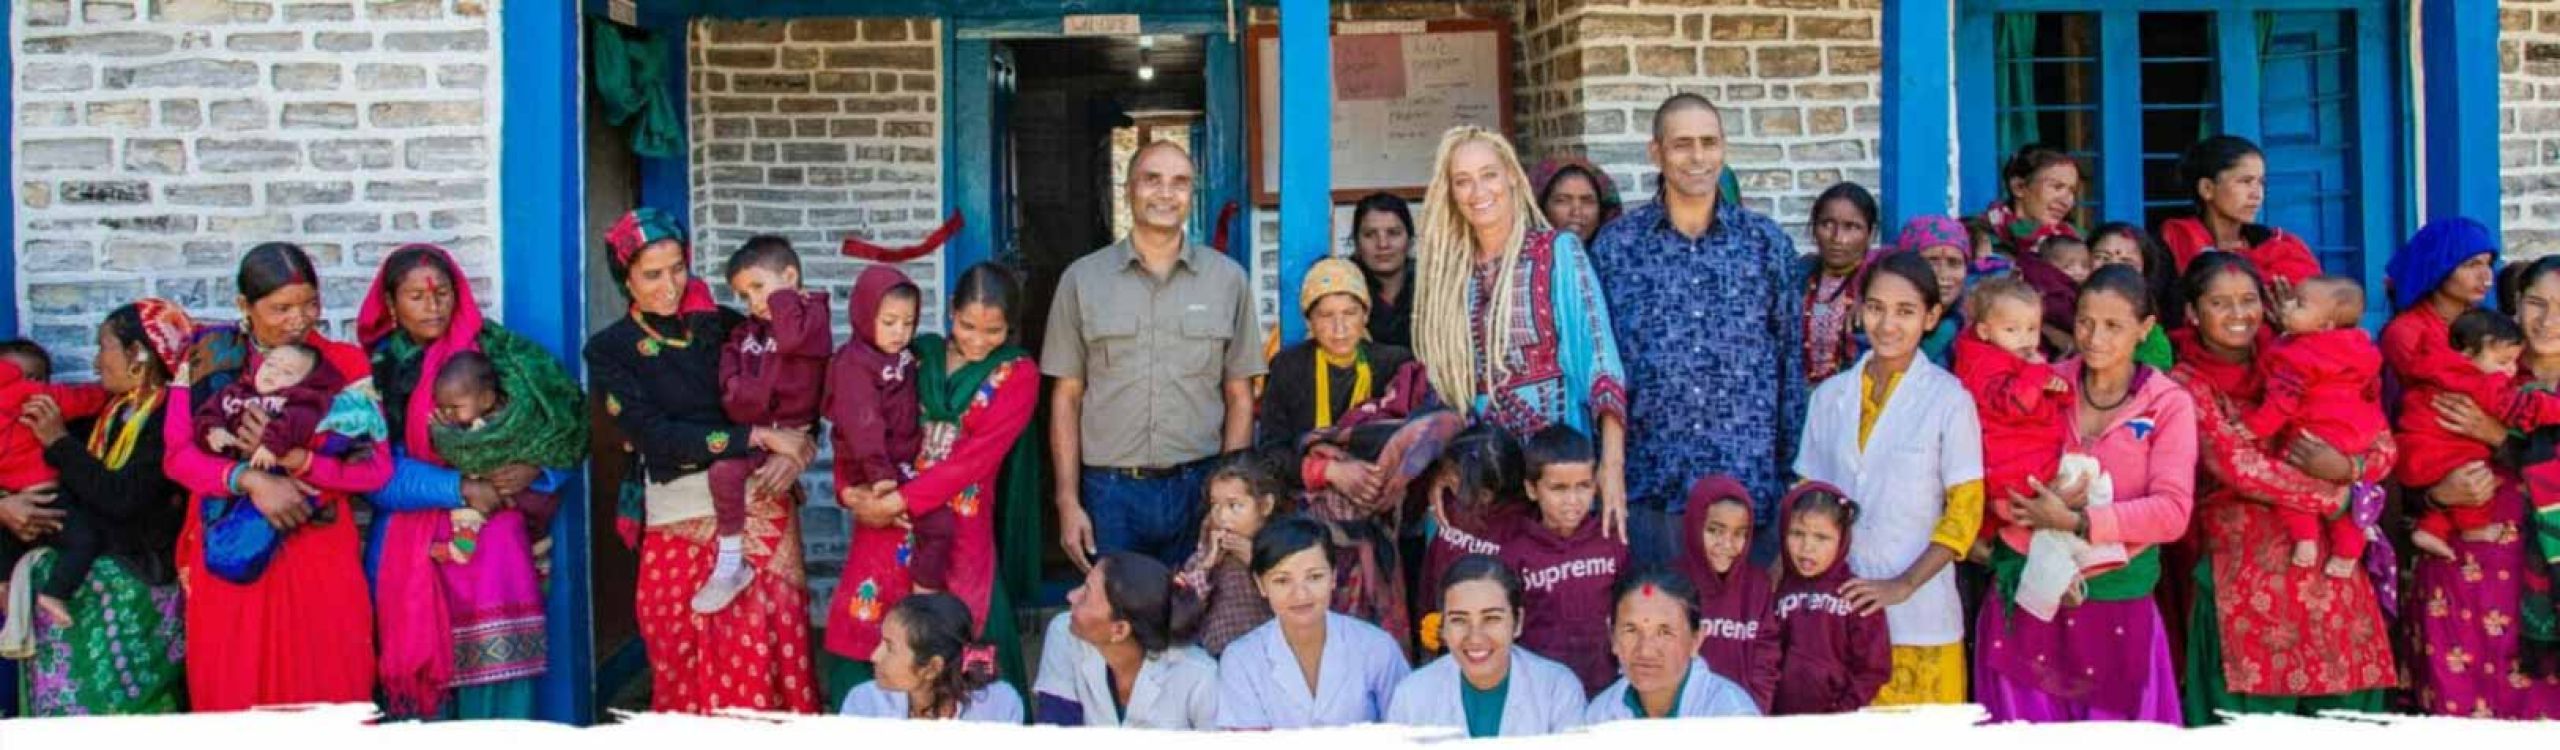 Discover how Back to Life e.V. supports education, healthcare, and sustainable development in Nepal, bringing hope and change to communities.